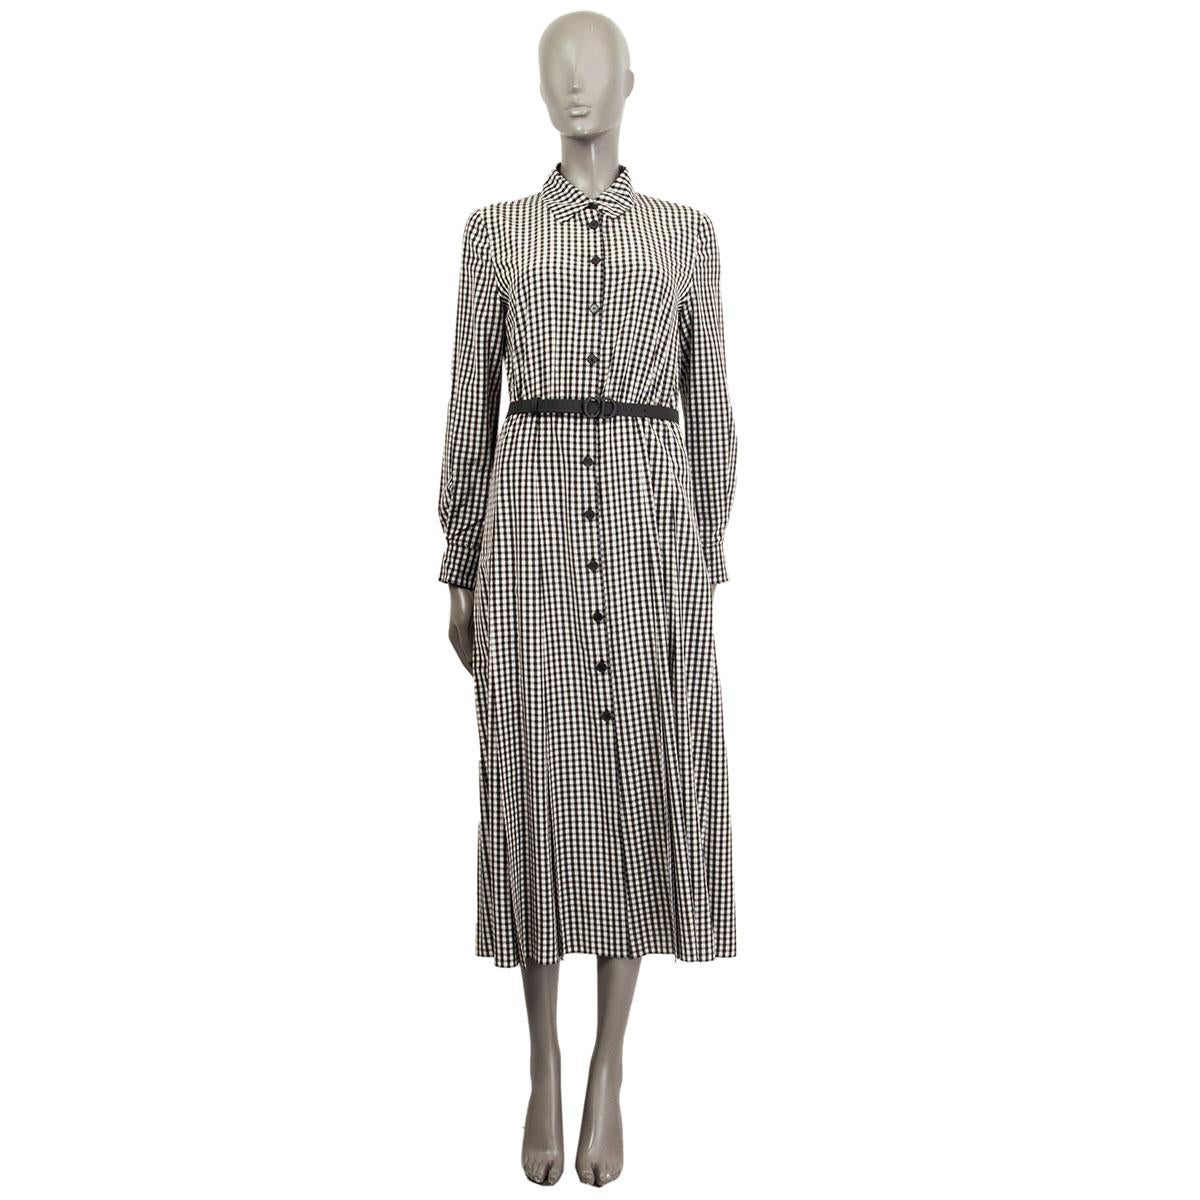 100% authentic Christian Dior shirt dress in black and white silk (100%) with gingham print. Comes with a CD-logo leather belt, long sleeves with one button cuffs and a slip-dress in black silk (100%). Has been worn and is in excellent